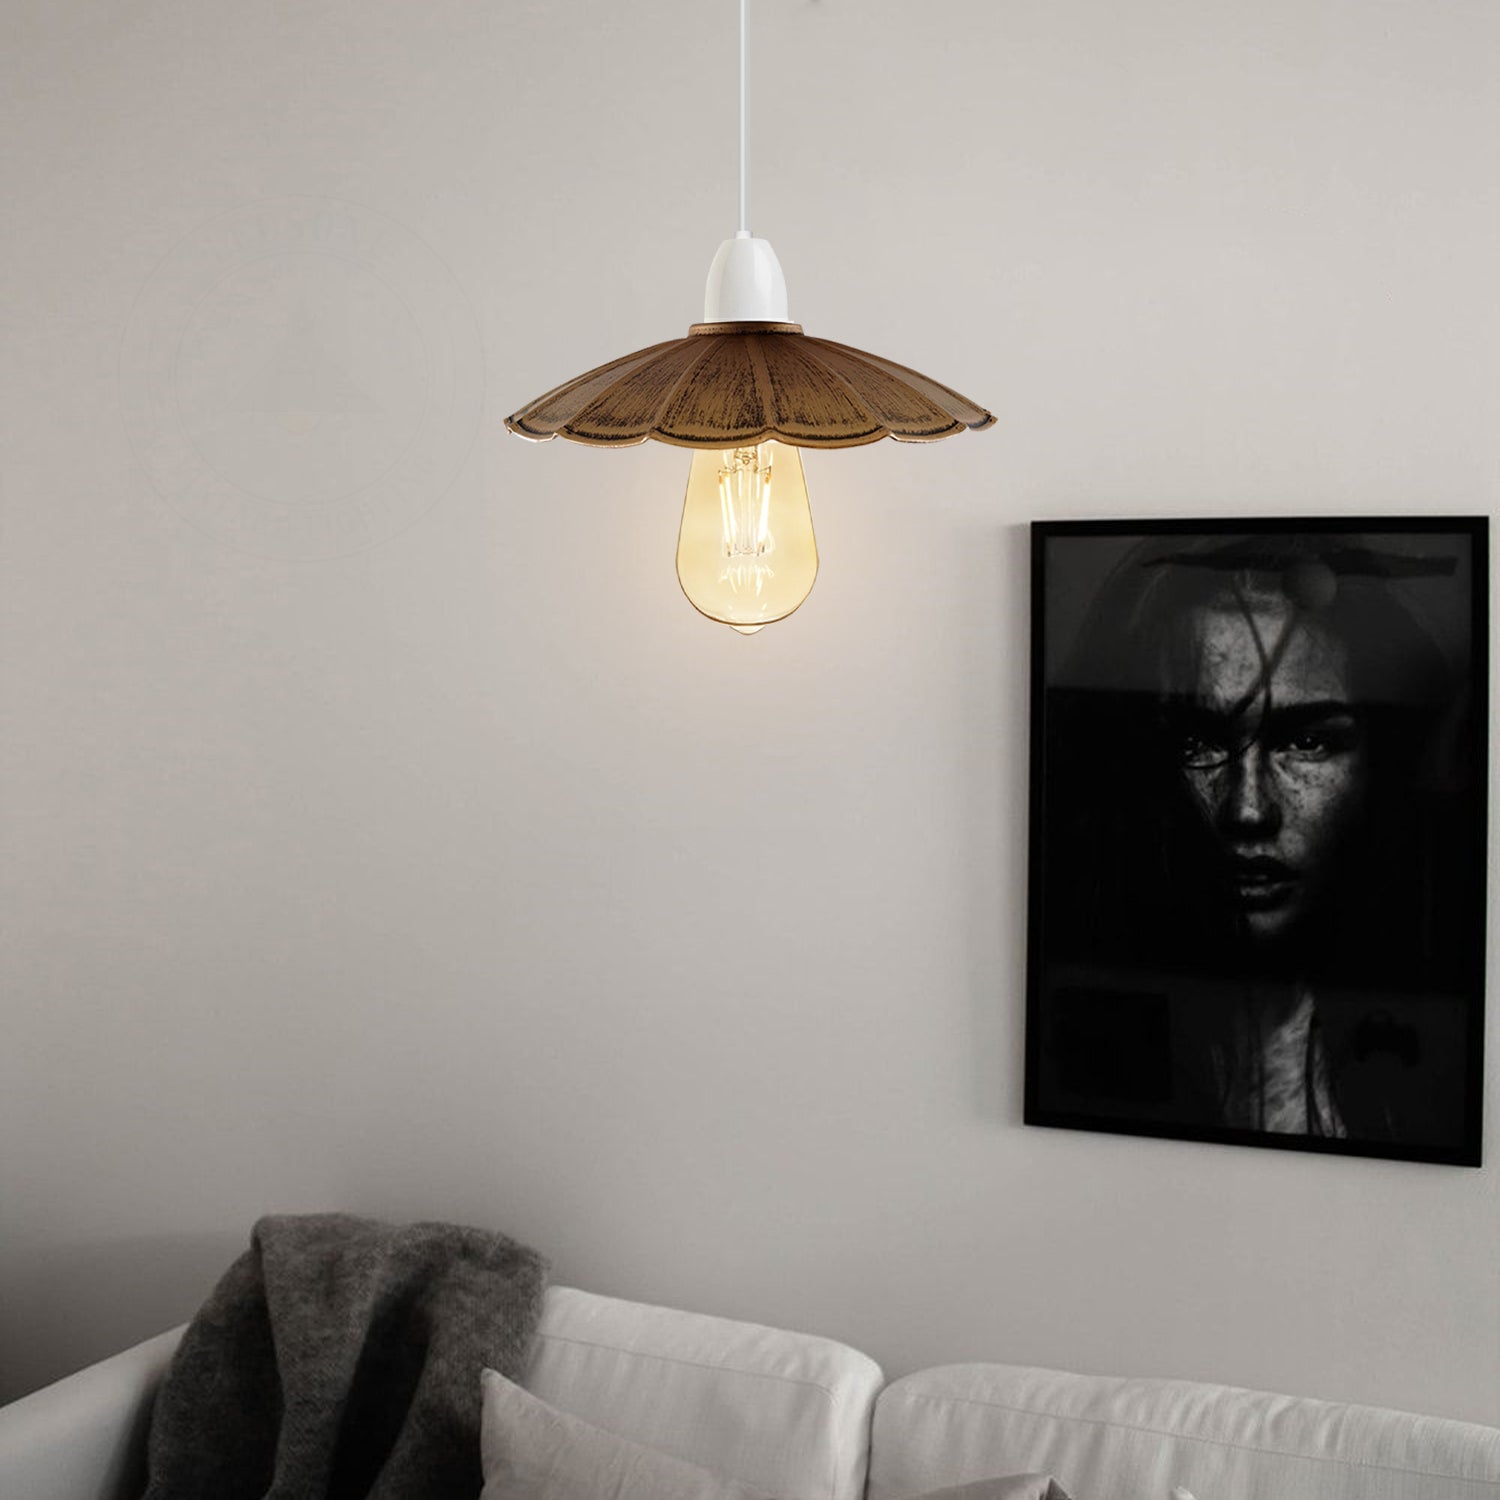  Industrial Wavy Shade Rustic Lampshade Ceiling Pendant Light-Application Image